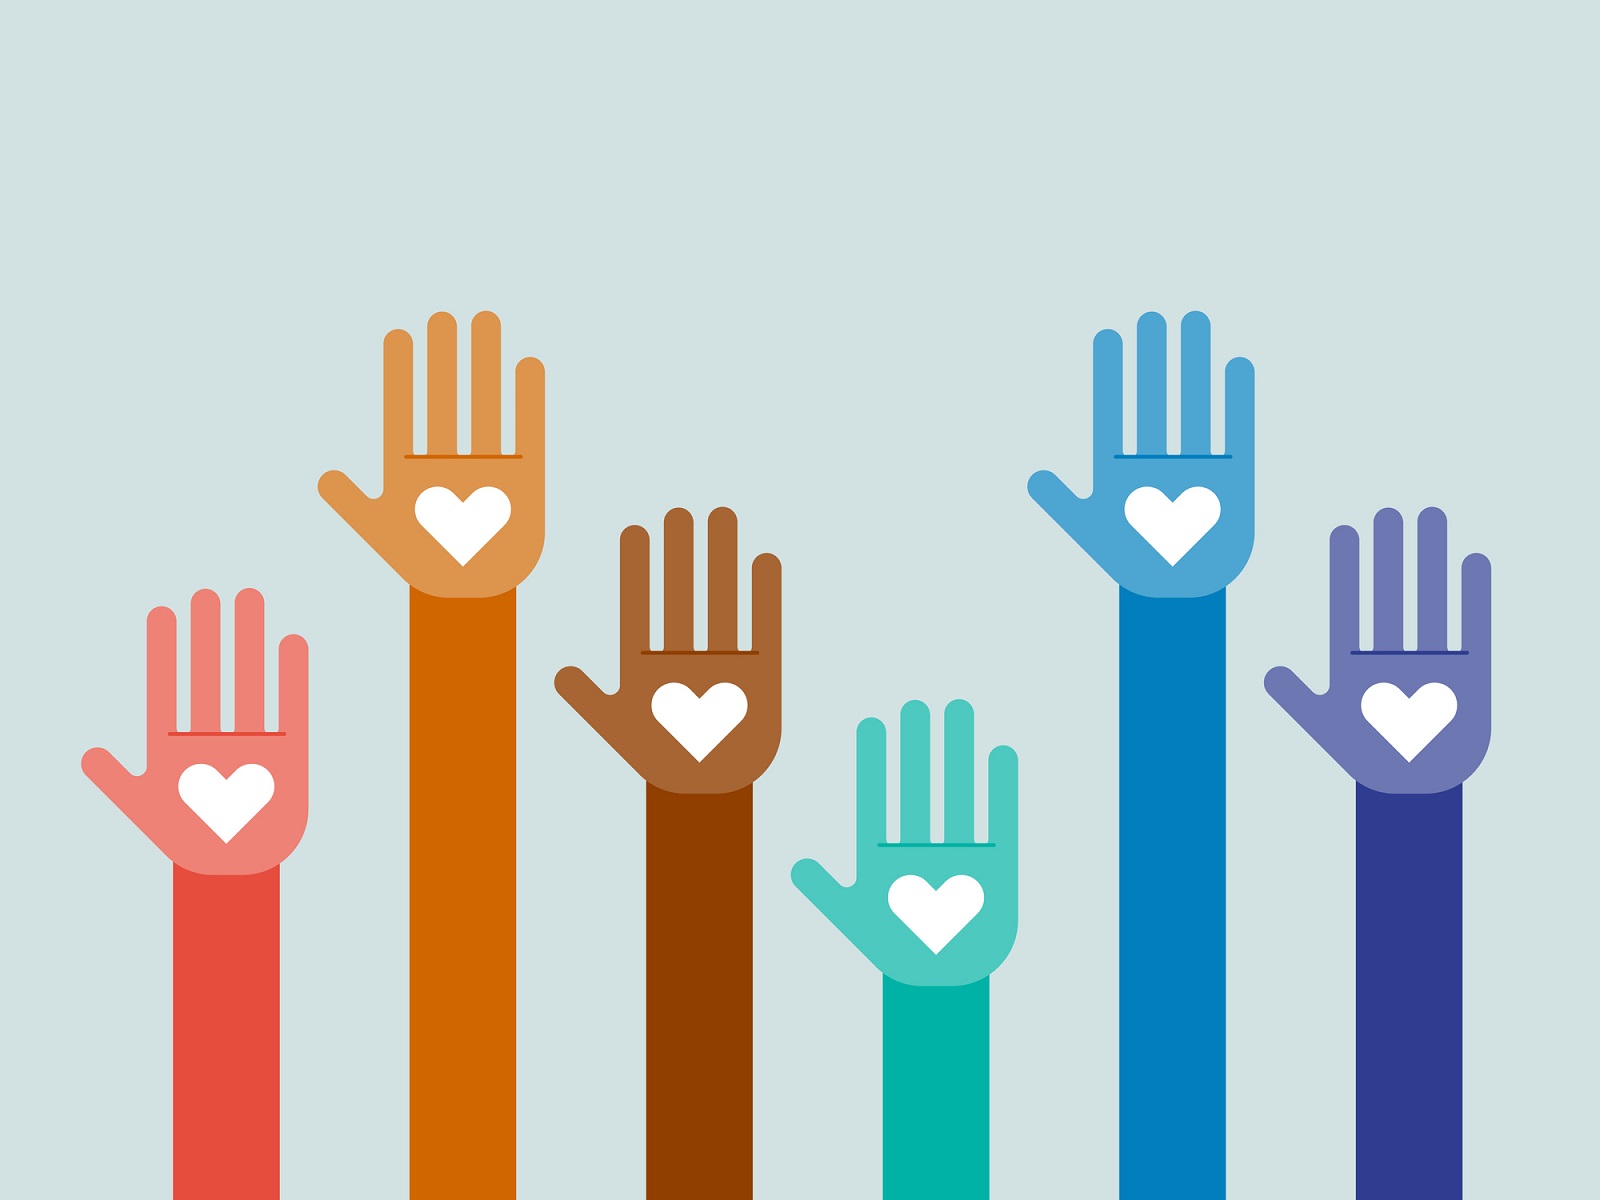 A graphic shows six arms with hearts on the palms reaching up into the air. Each are a different color, representing diversity.